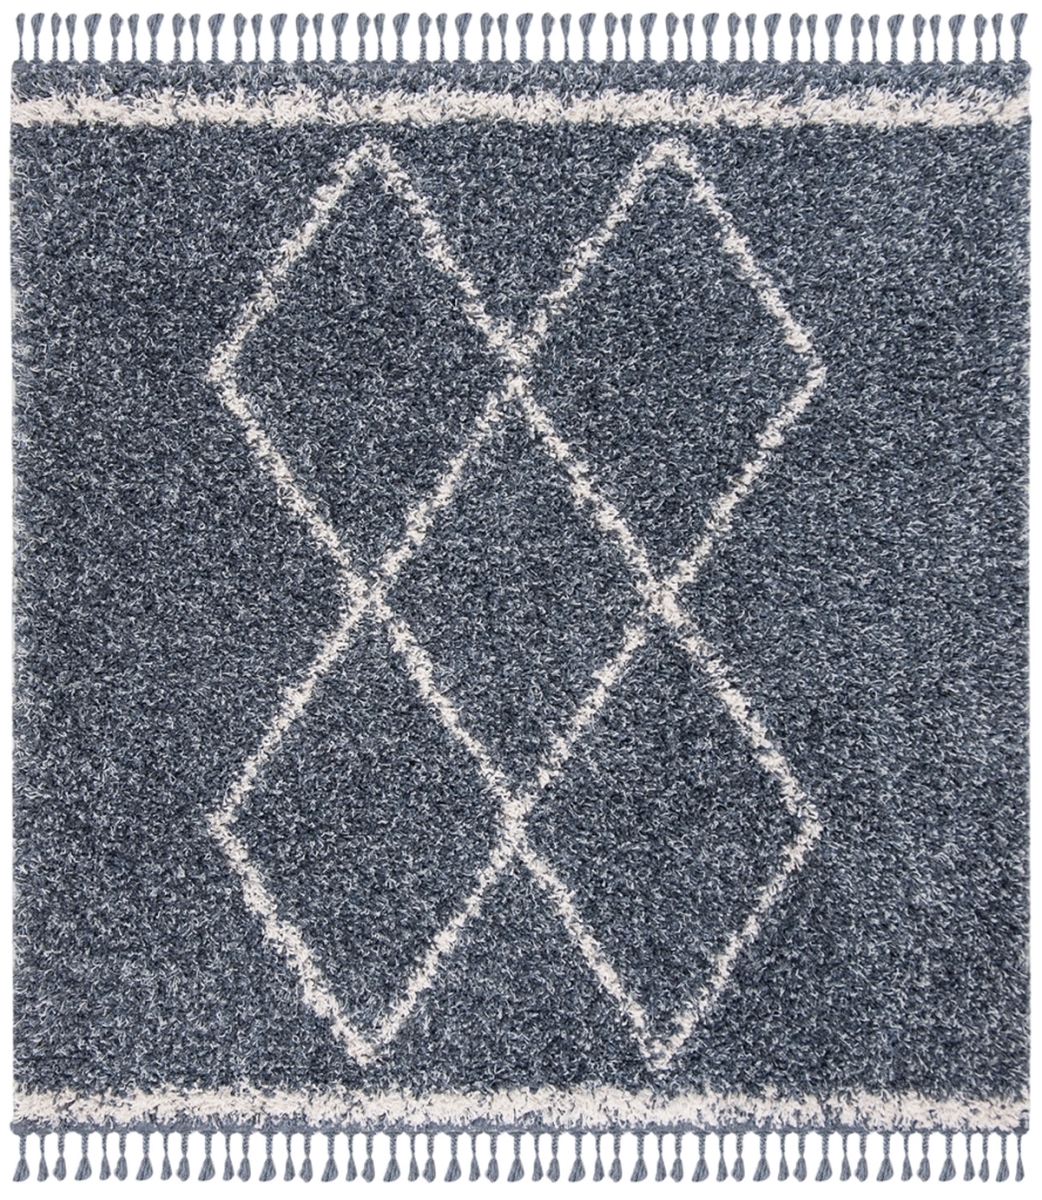 PLX435L-7SQ 6 ft. 7 in. x 6 ft. 7 in. Pro Lux Shag 435 Power Loomed Square Area Rug, Cream & Blue -  Safavieh